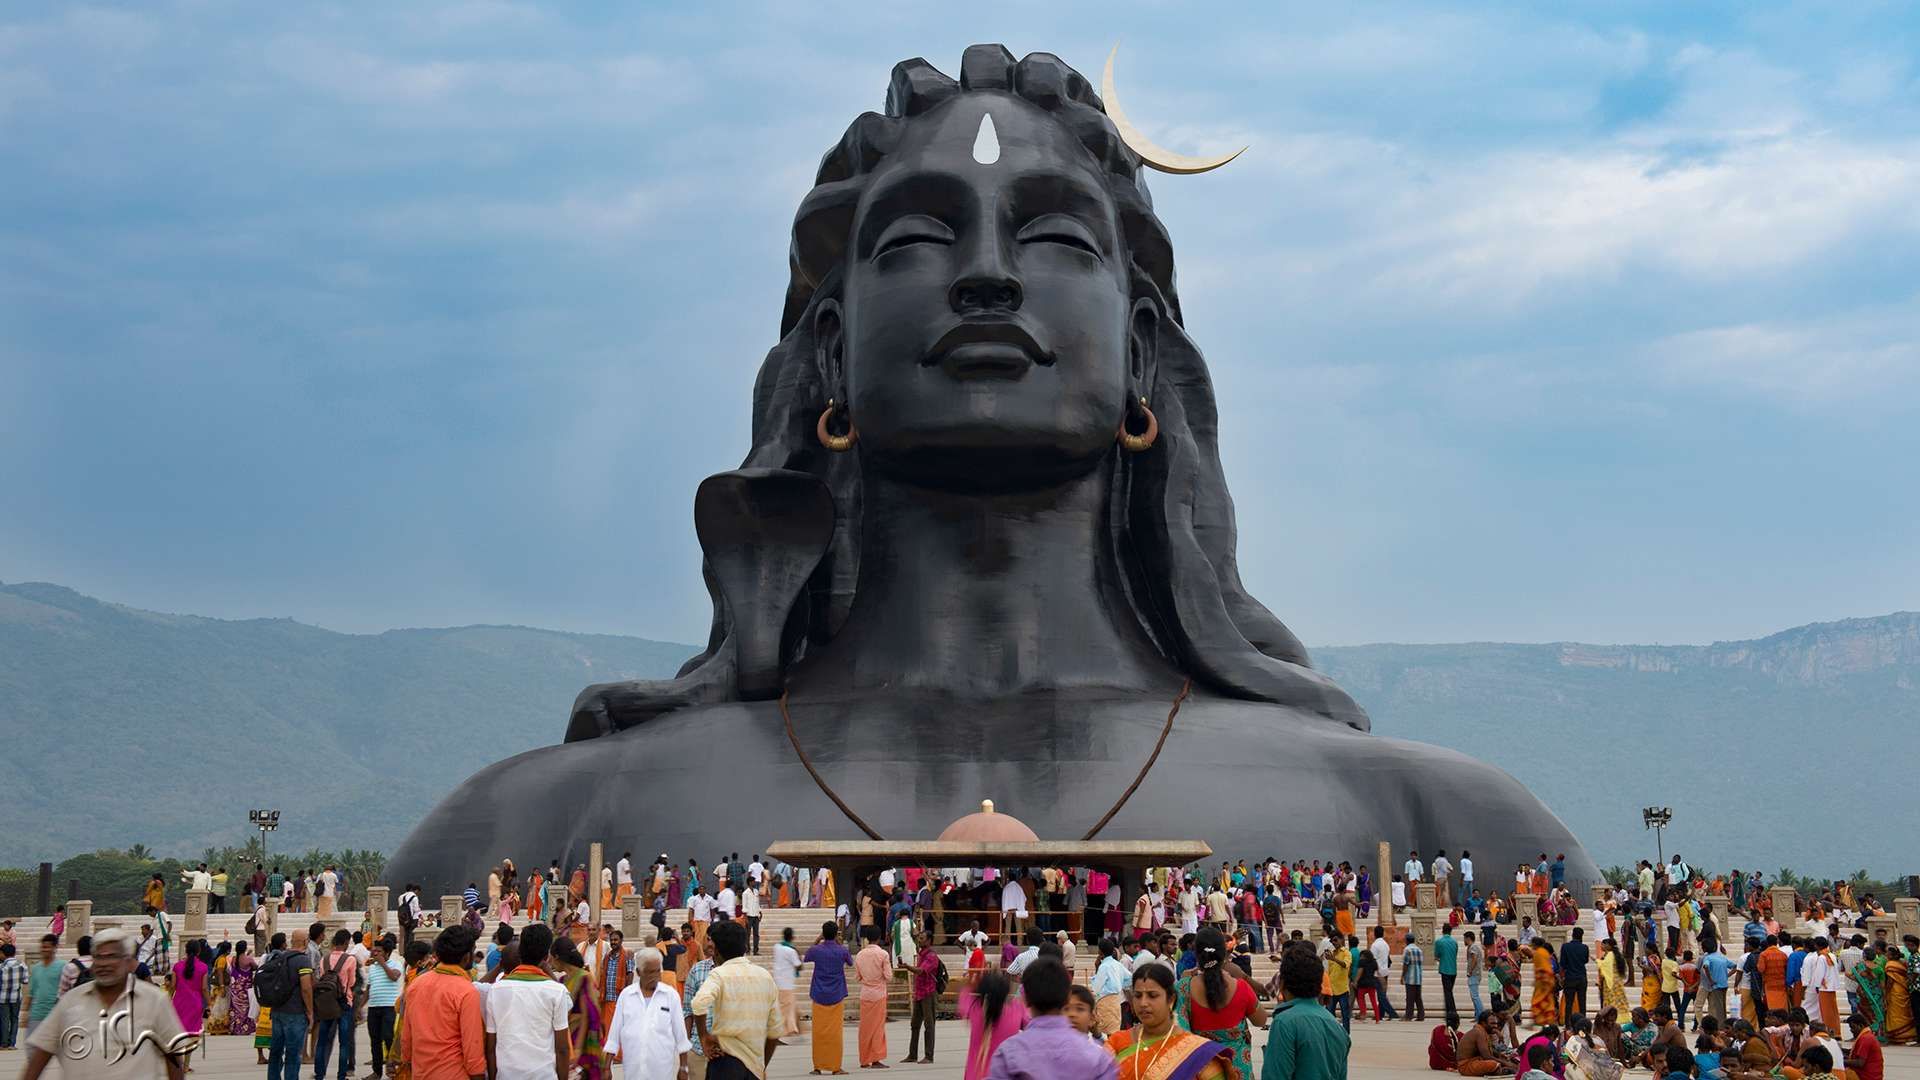 Image of Adiyogi, the 112 ft tall statue which won a Guinness World Record